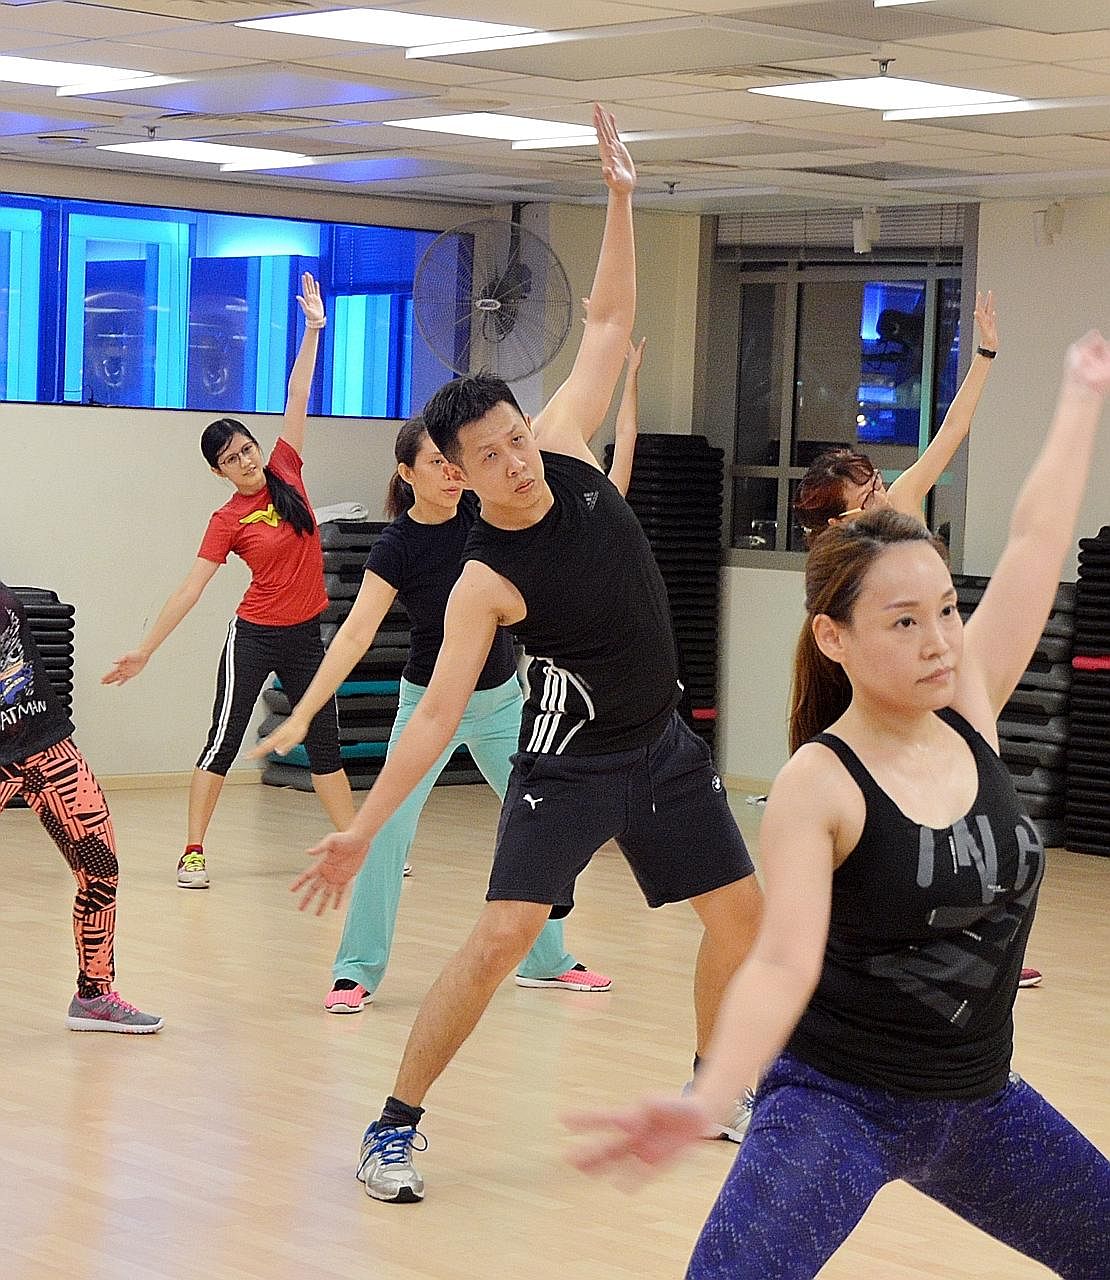 Mr Terence Yeo does not mind being one of the few men in his dance classes as dancing helps him destress.